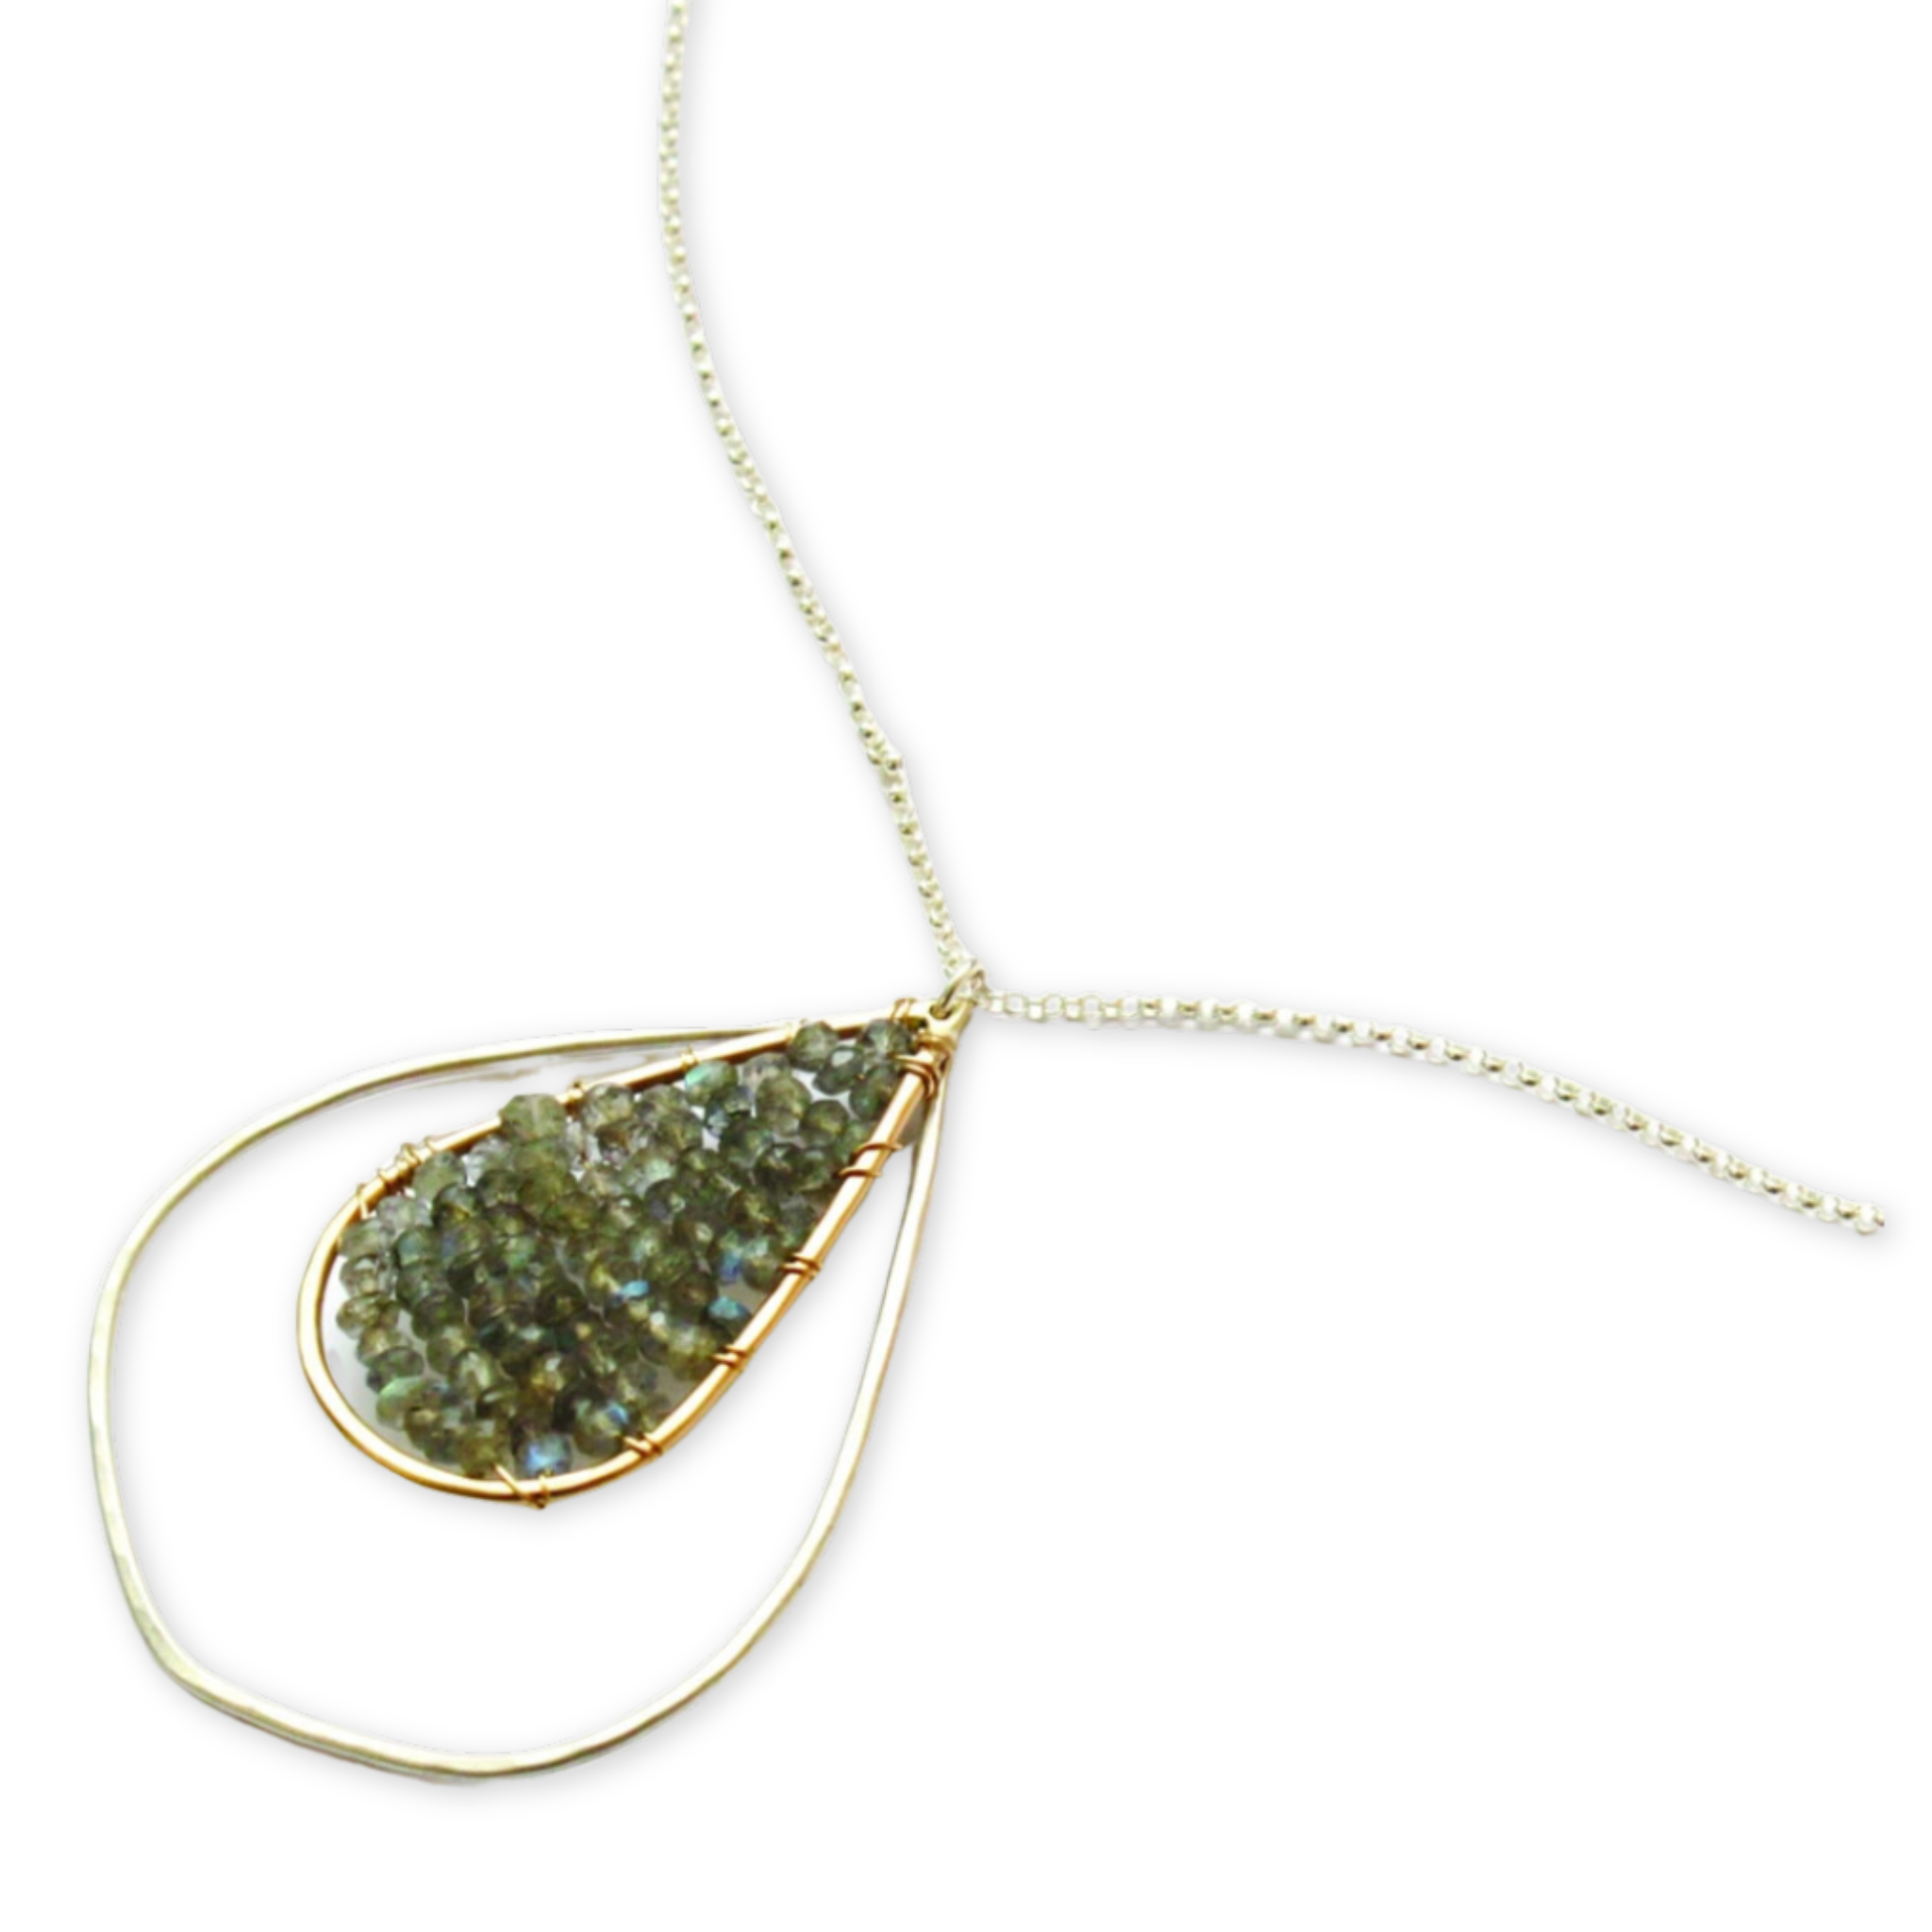 necklace with a hammered petal shaped pendant surrounding a teardrop shaped pendant adorned with small faceted stones attached by wire